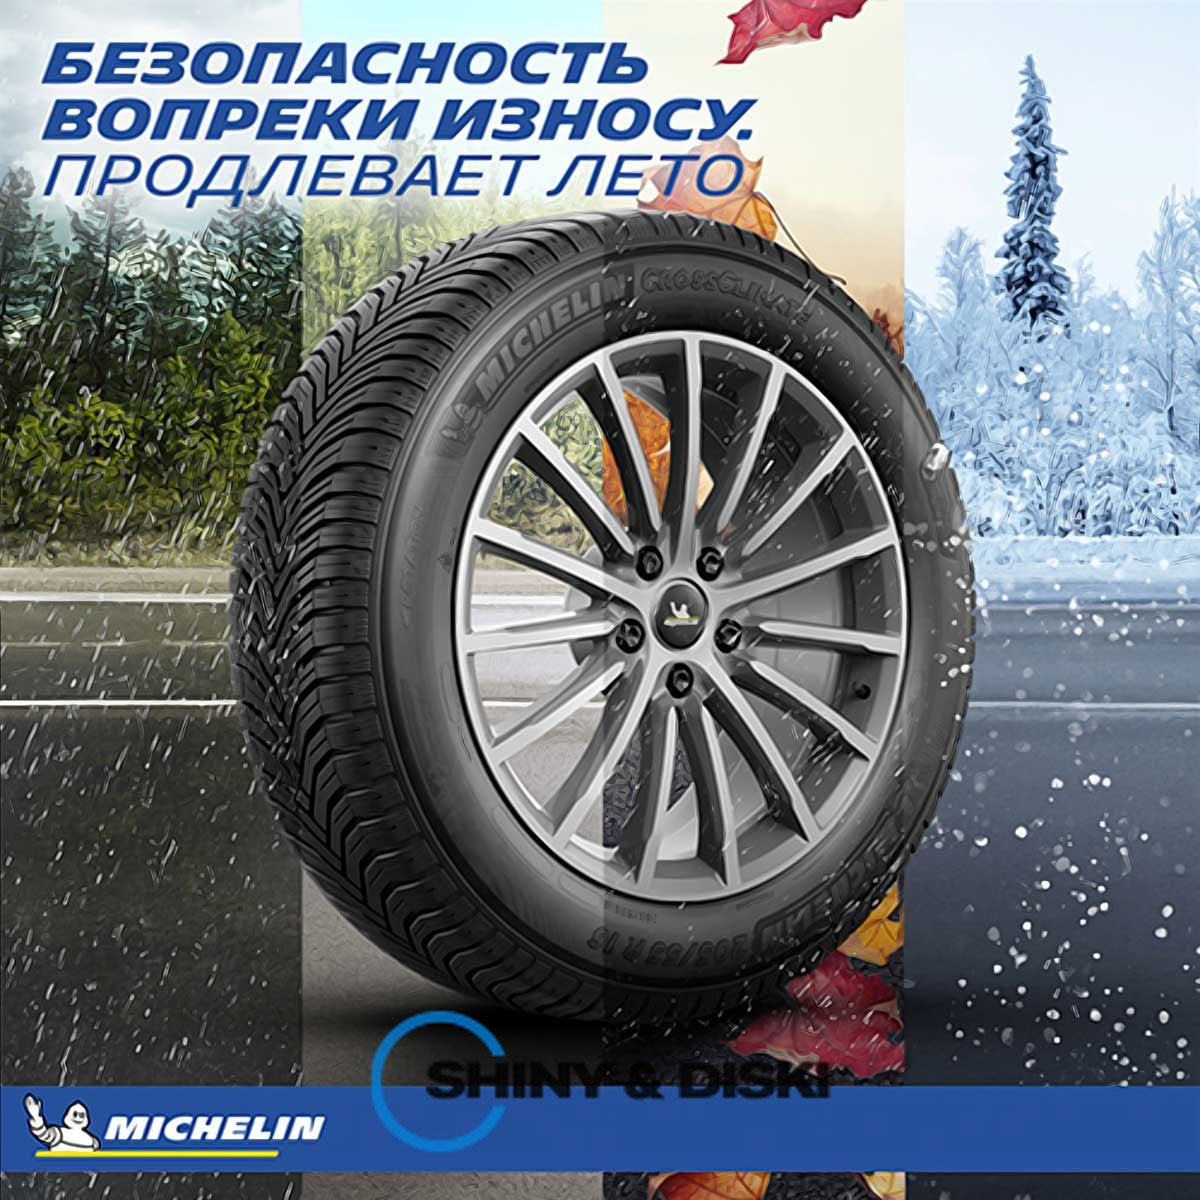 покрышки michelin cross climate+ 225/50 r17 98v xl